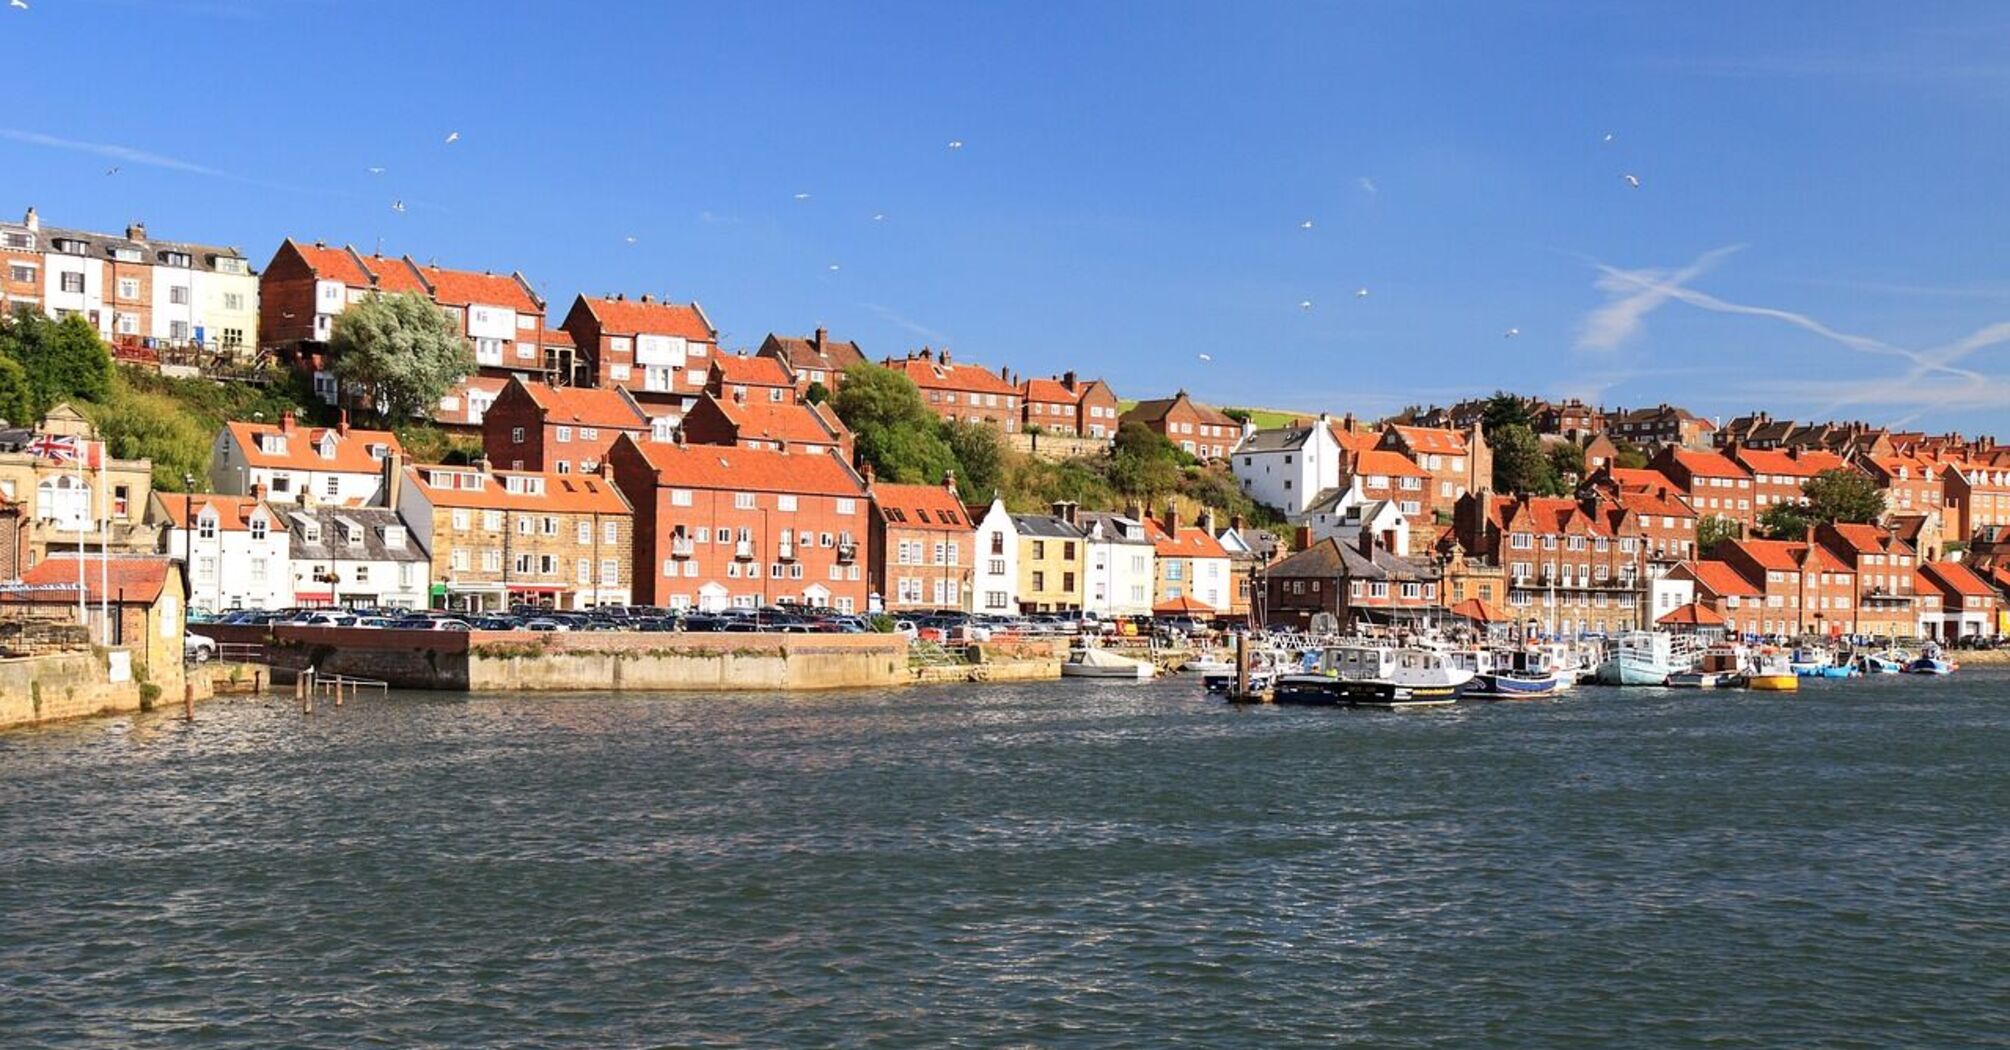 "The most beautiful" seaside town in the UK has been named one of the best places to visit